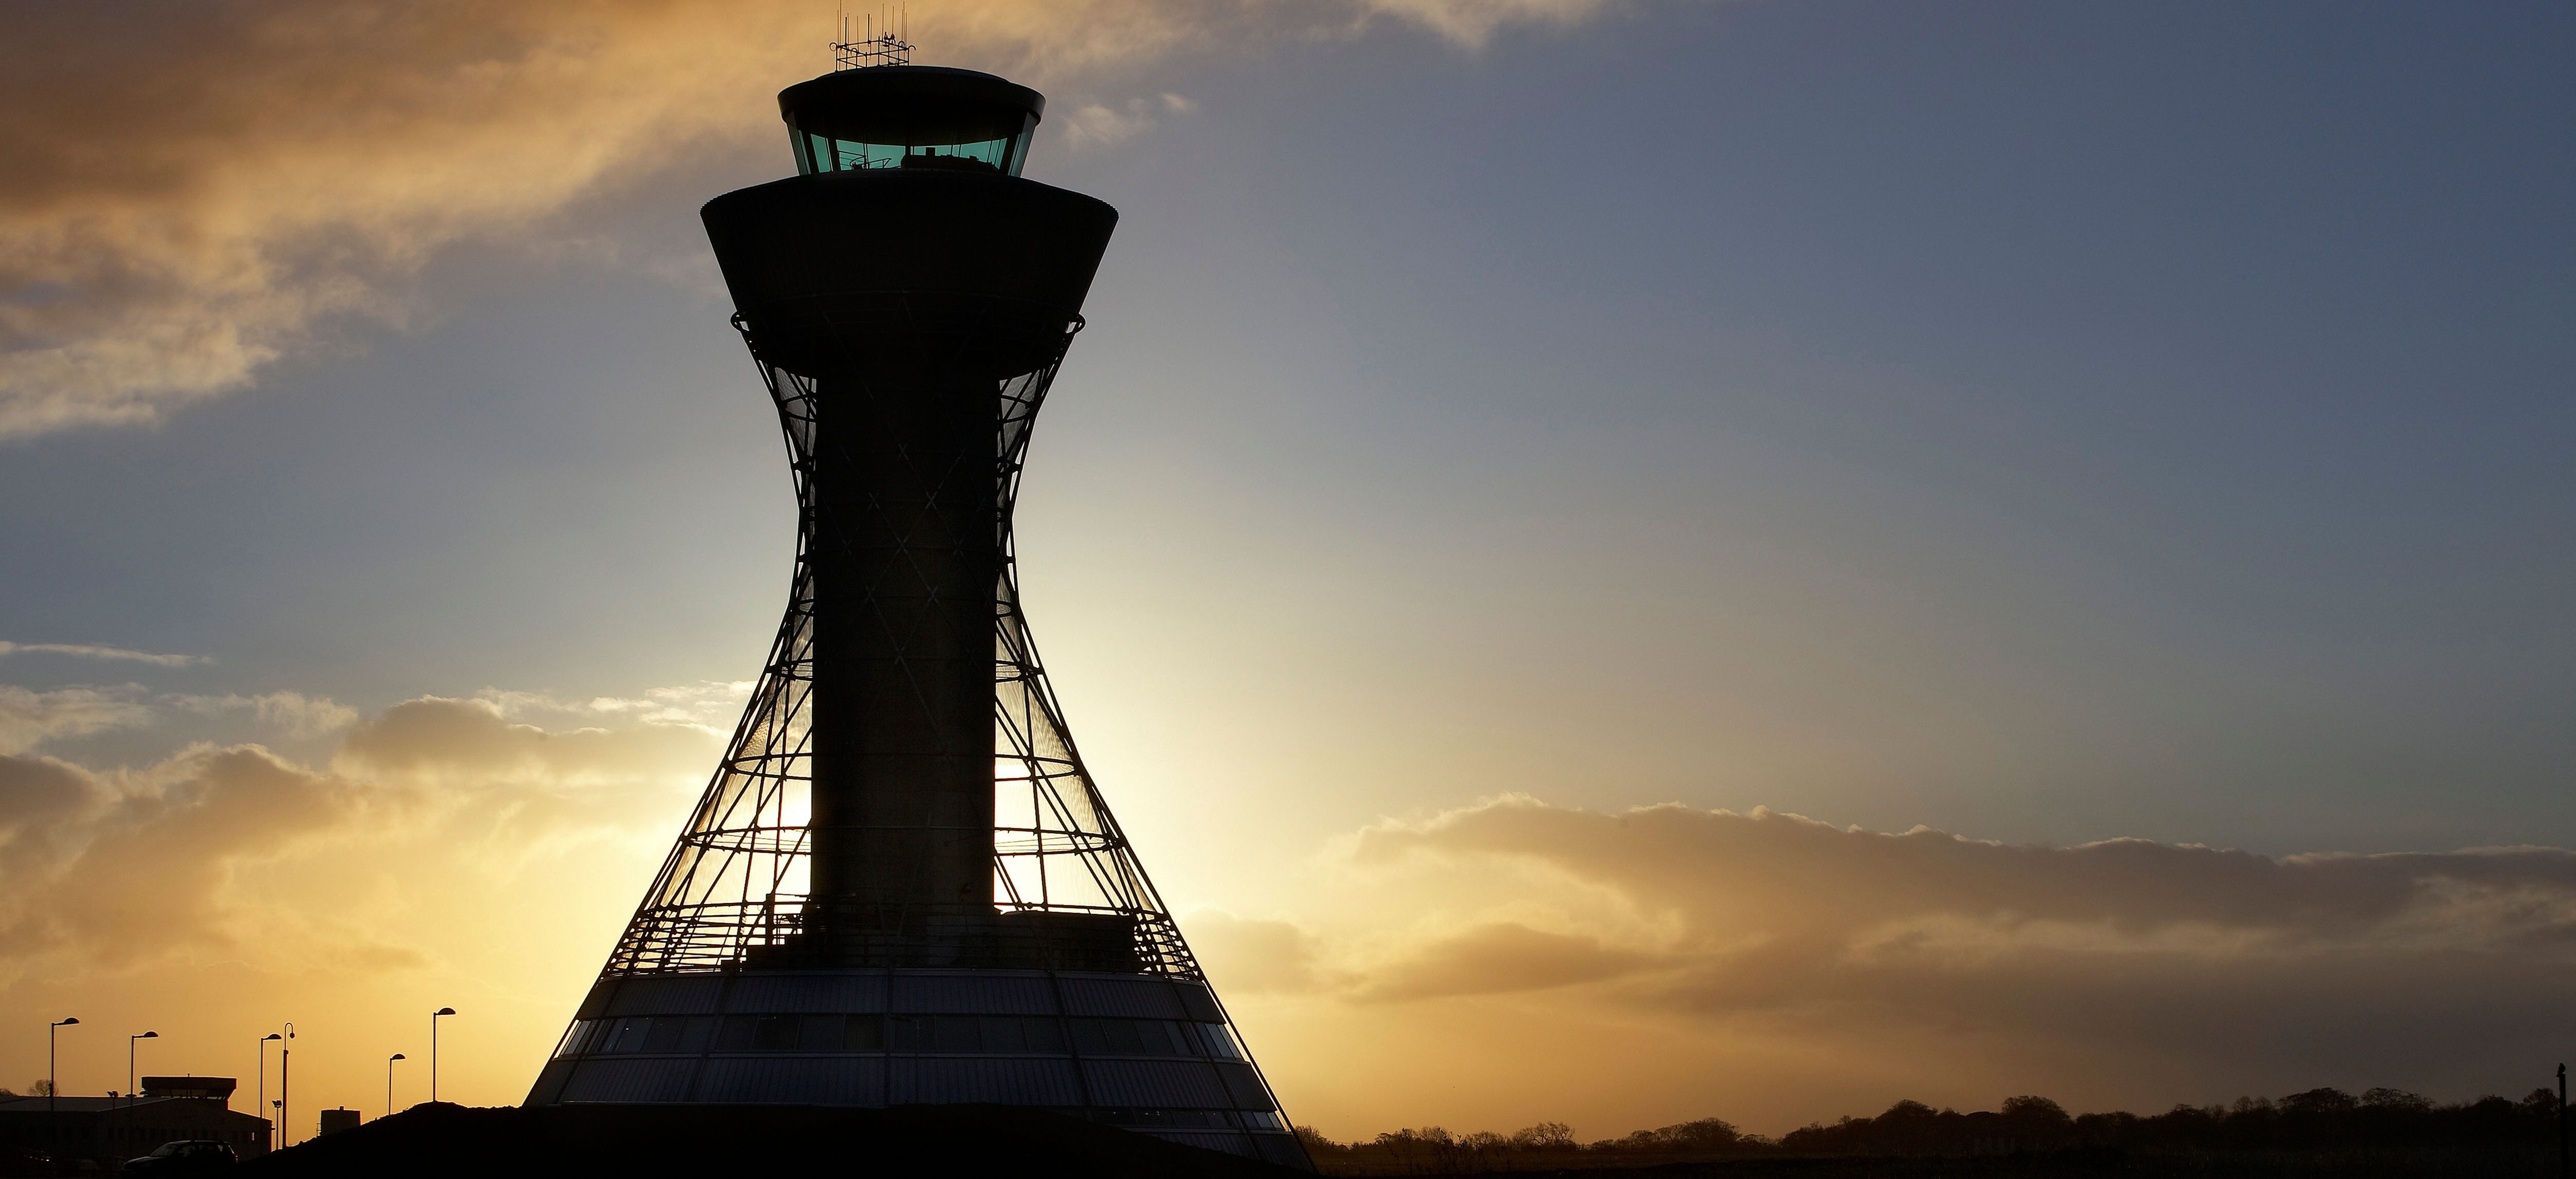 NEWCASTLE AIRPORT CONTROL TOWER